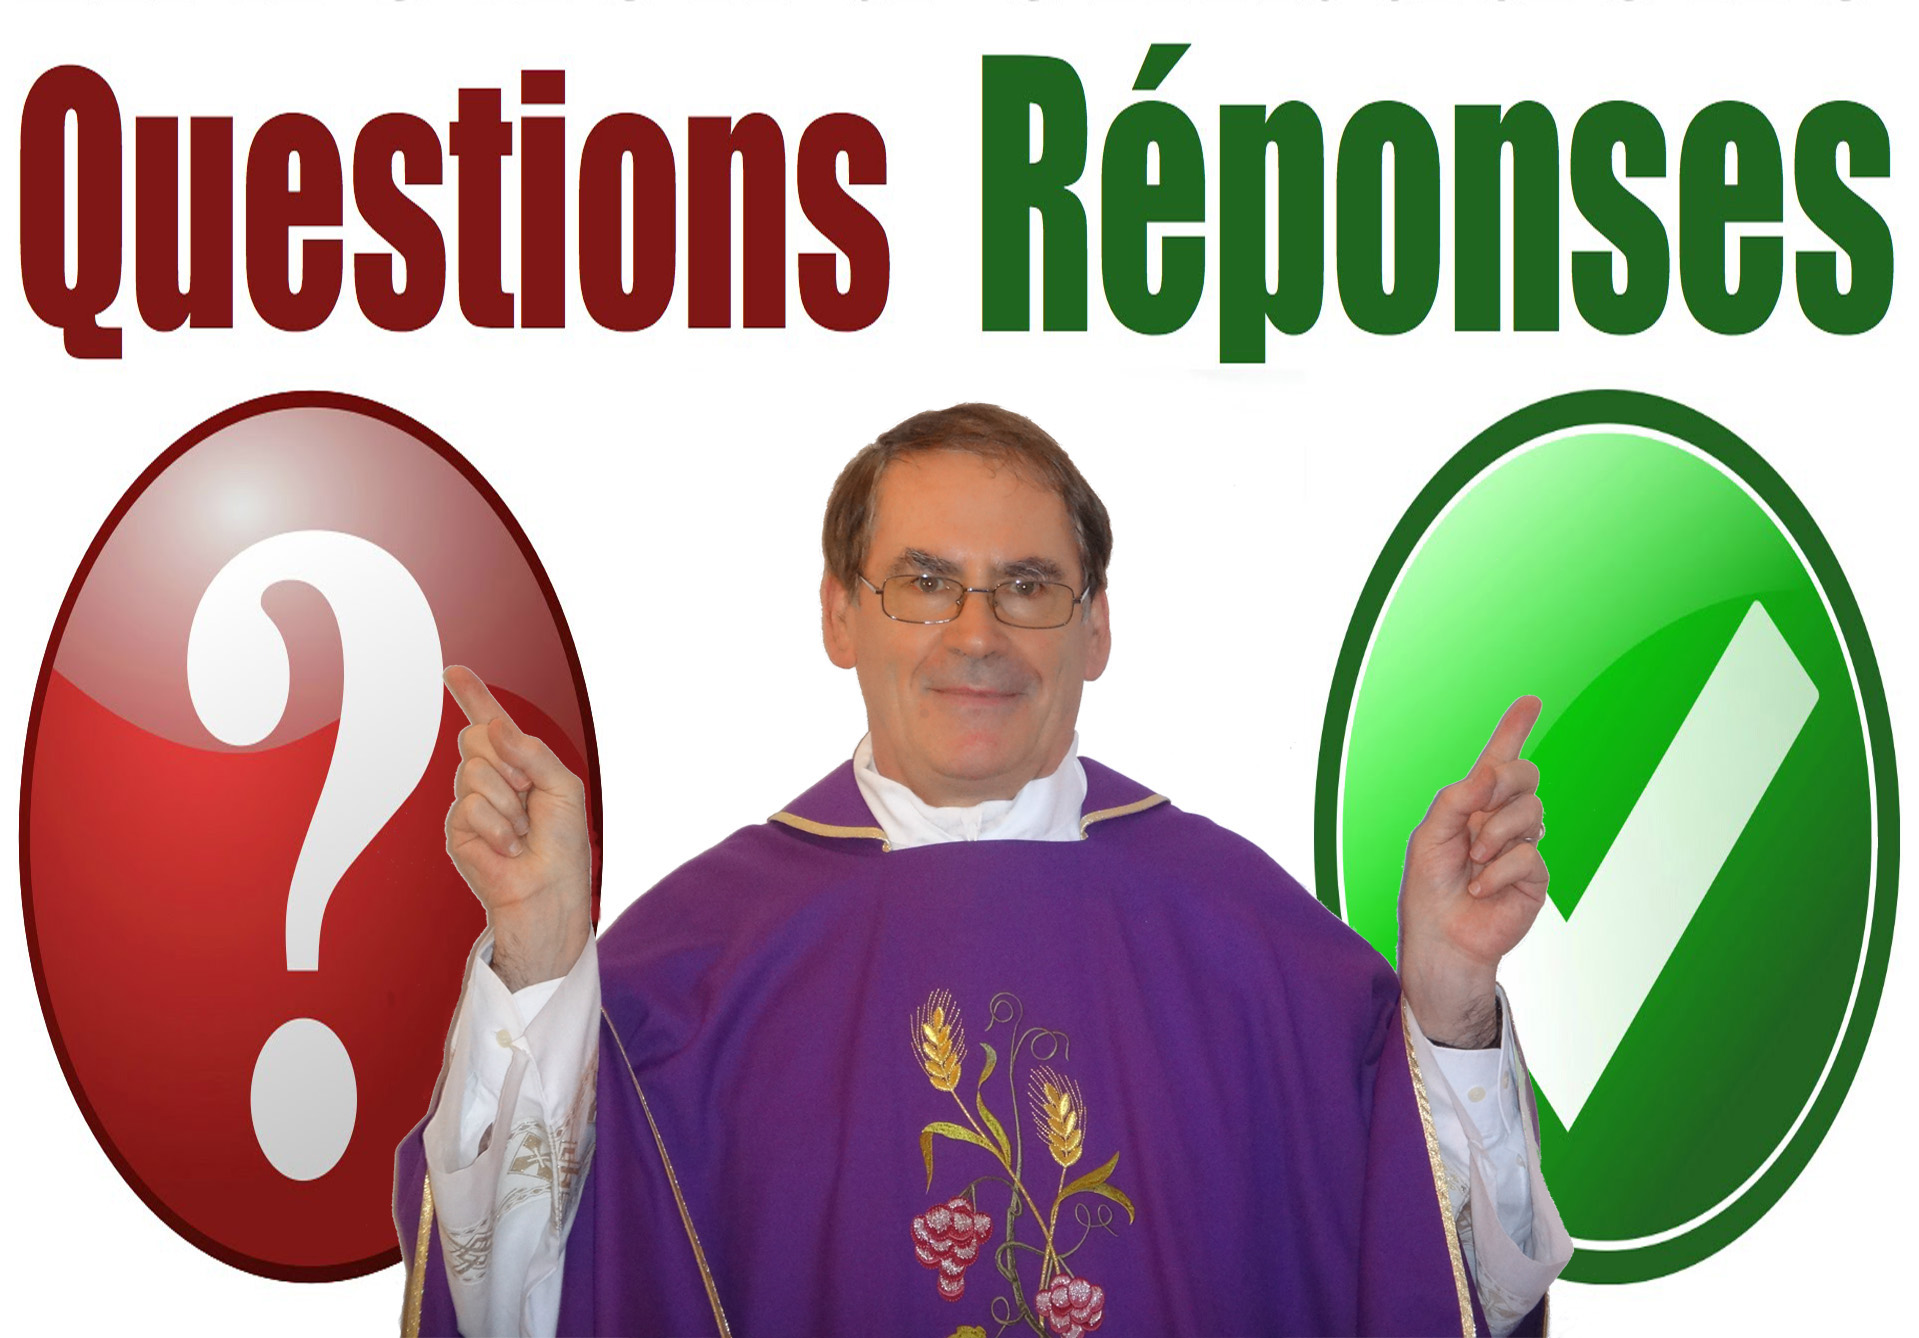 Questions Reponses